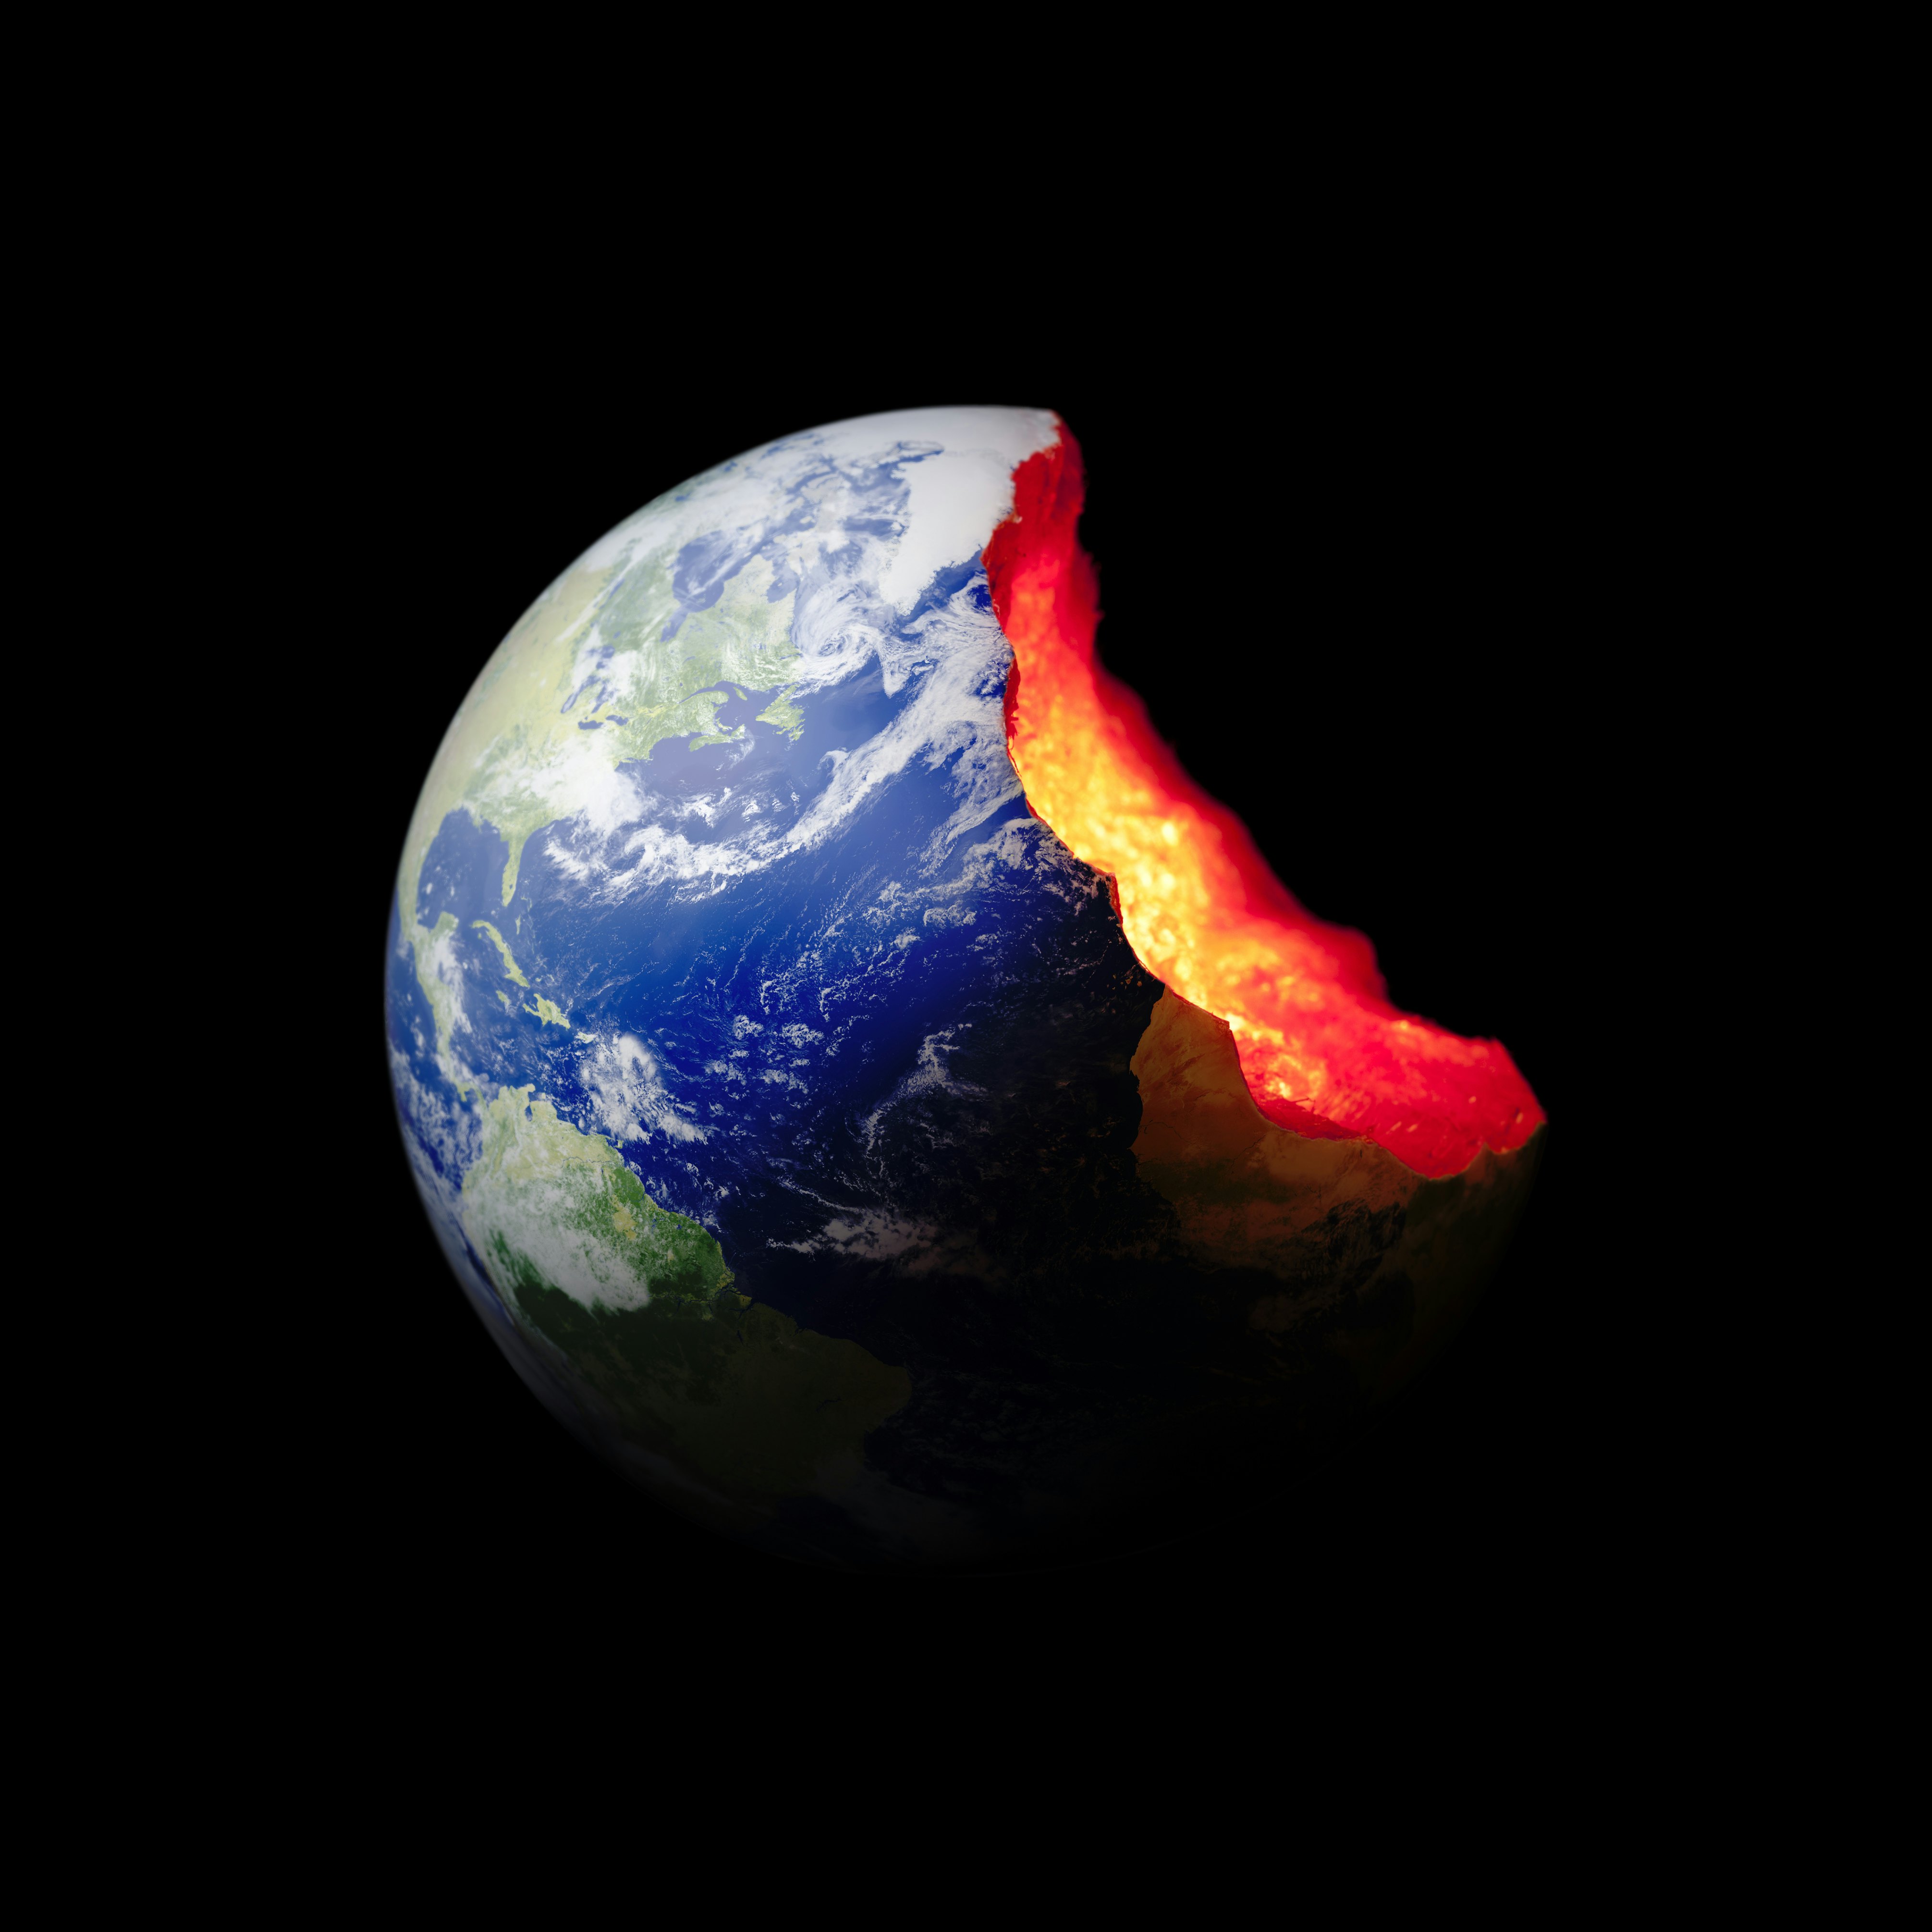 If The Earth's Core Is So Hot, Why Doesn't It Melt?, Latest Science News  and Articles